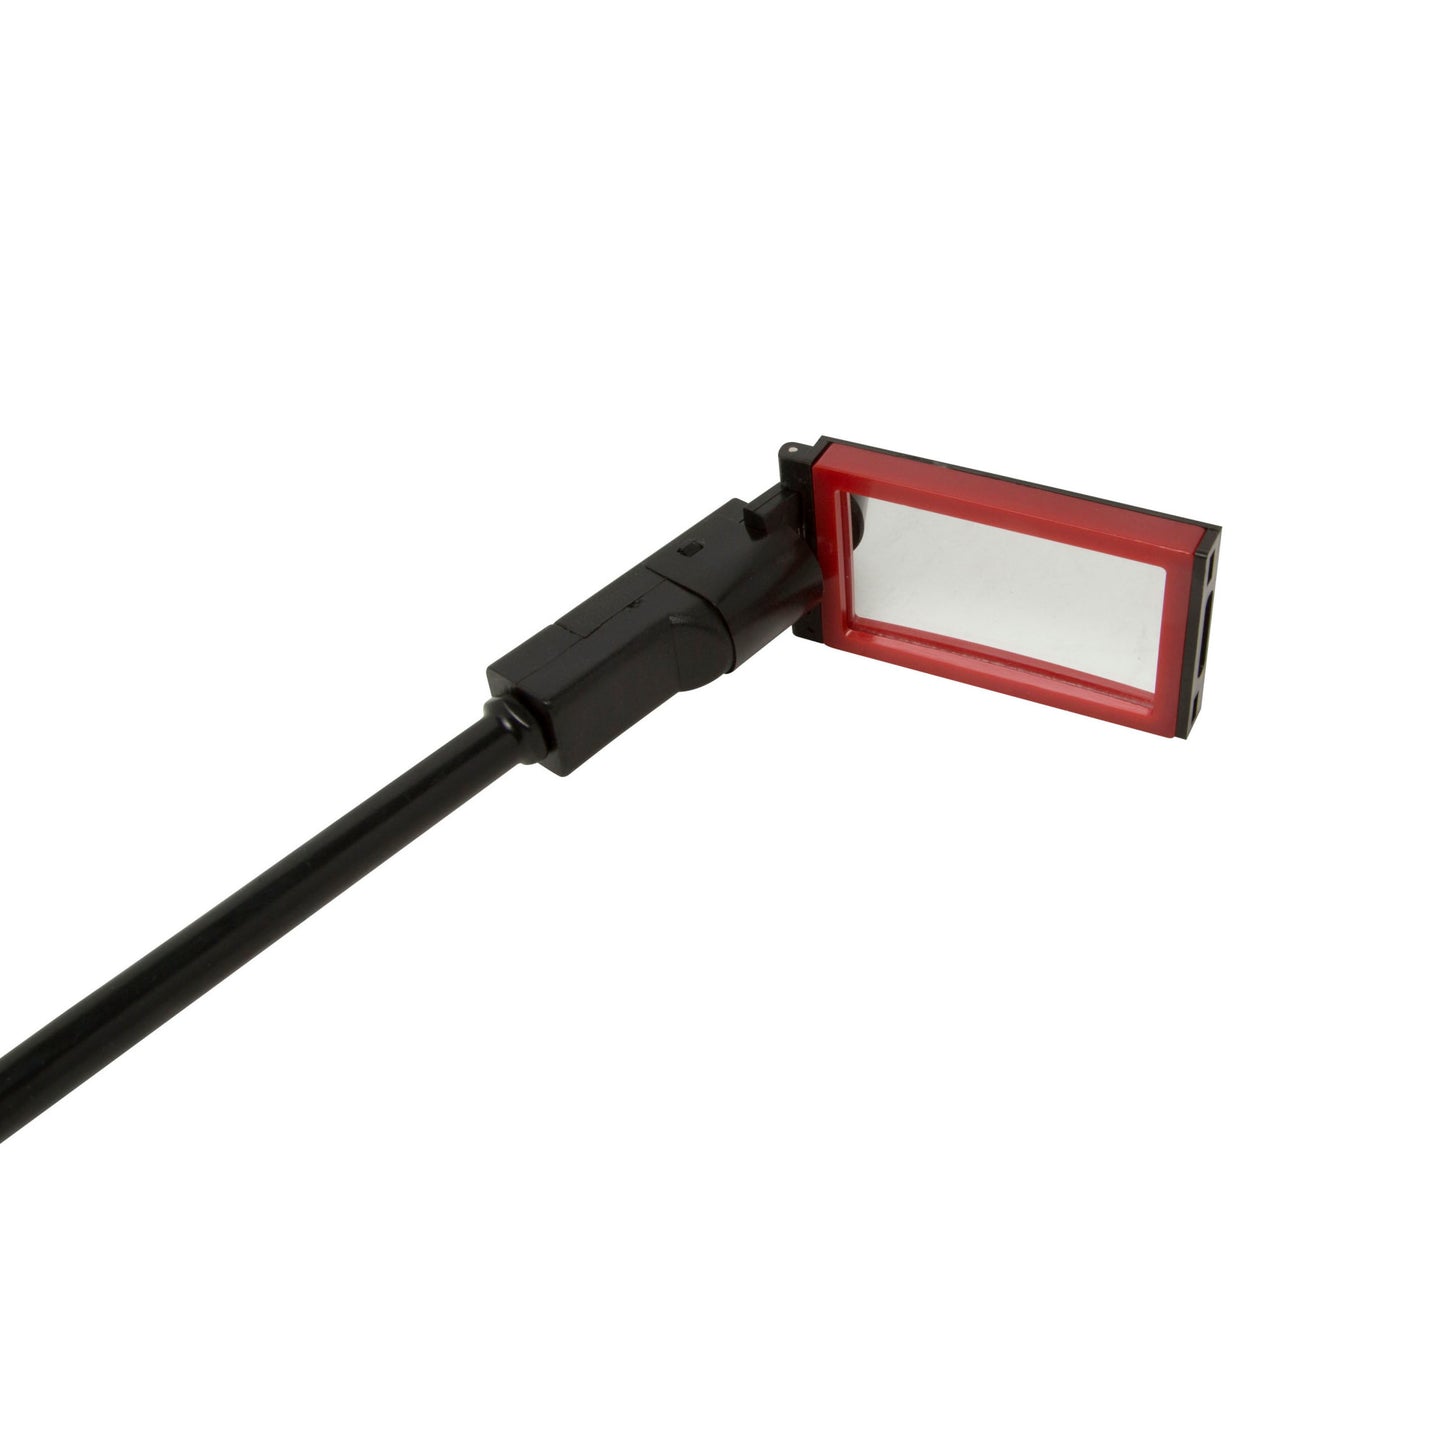 42-inch Flexible Shaft Lighted Inspection Moirror